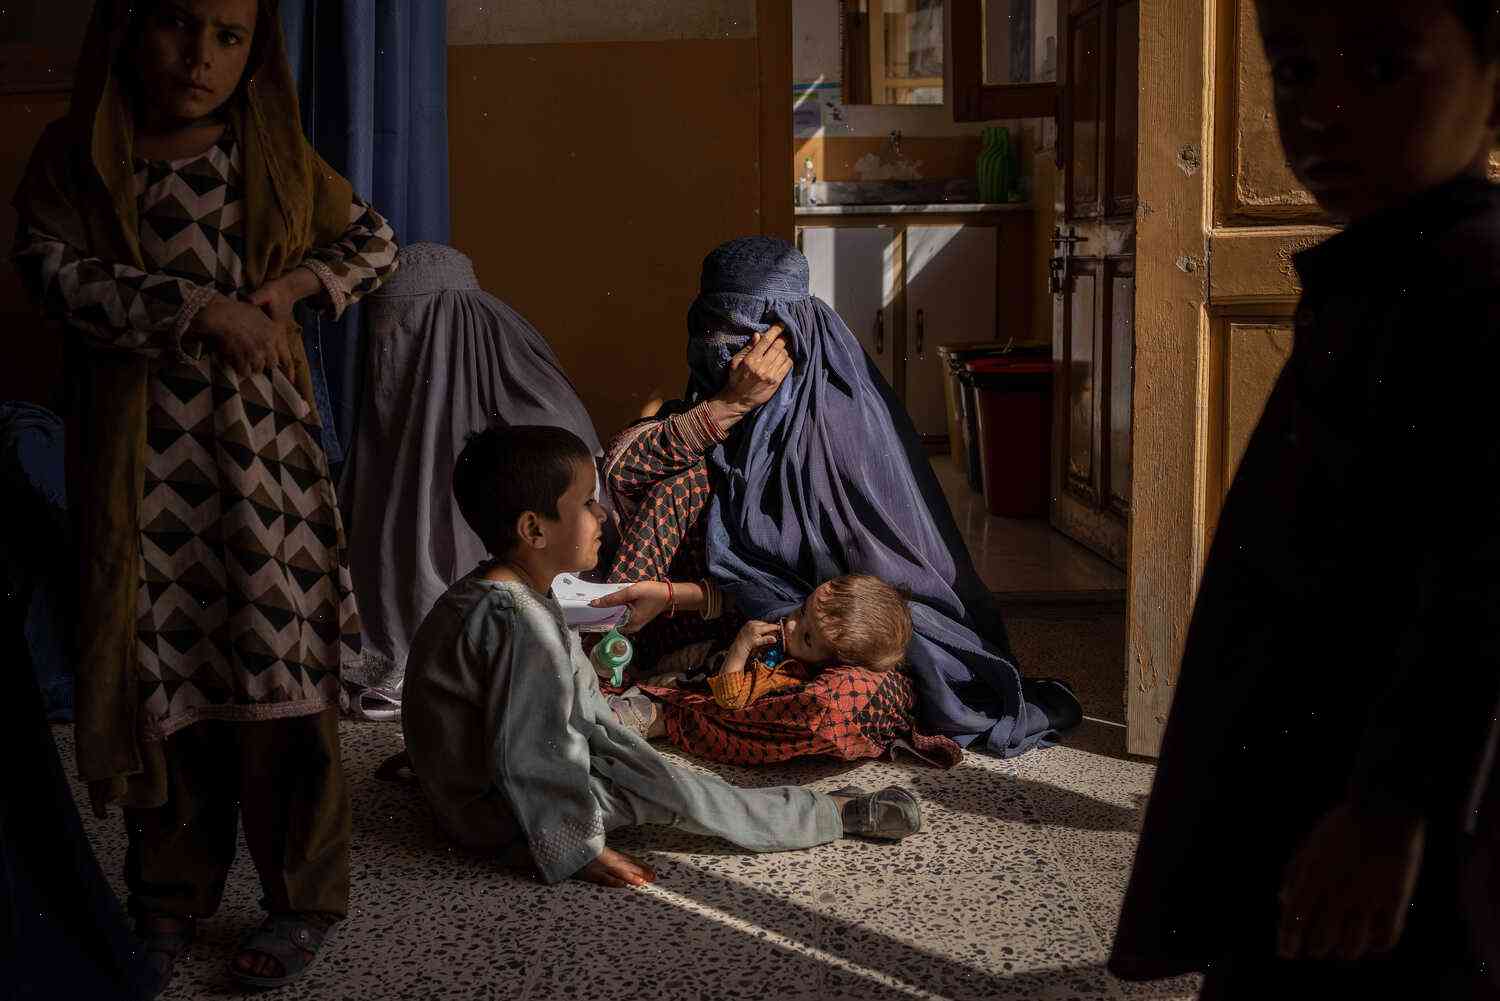 Let's double our investment in food aid in Afghanistan